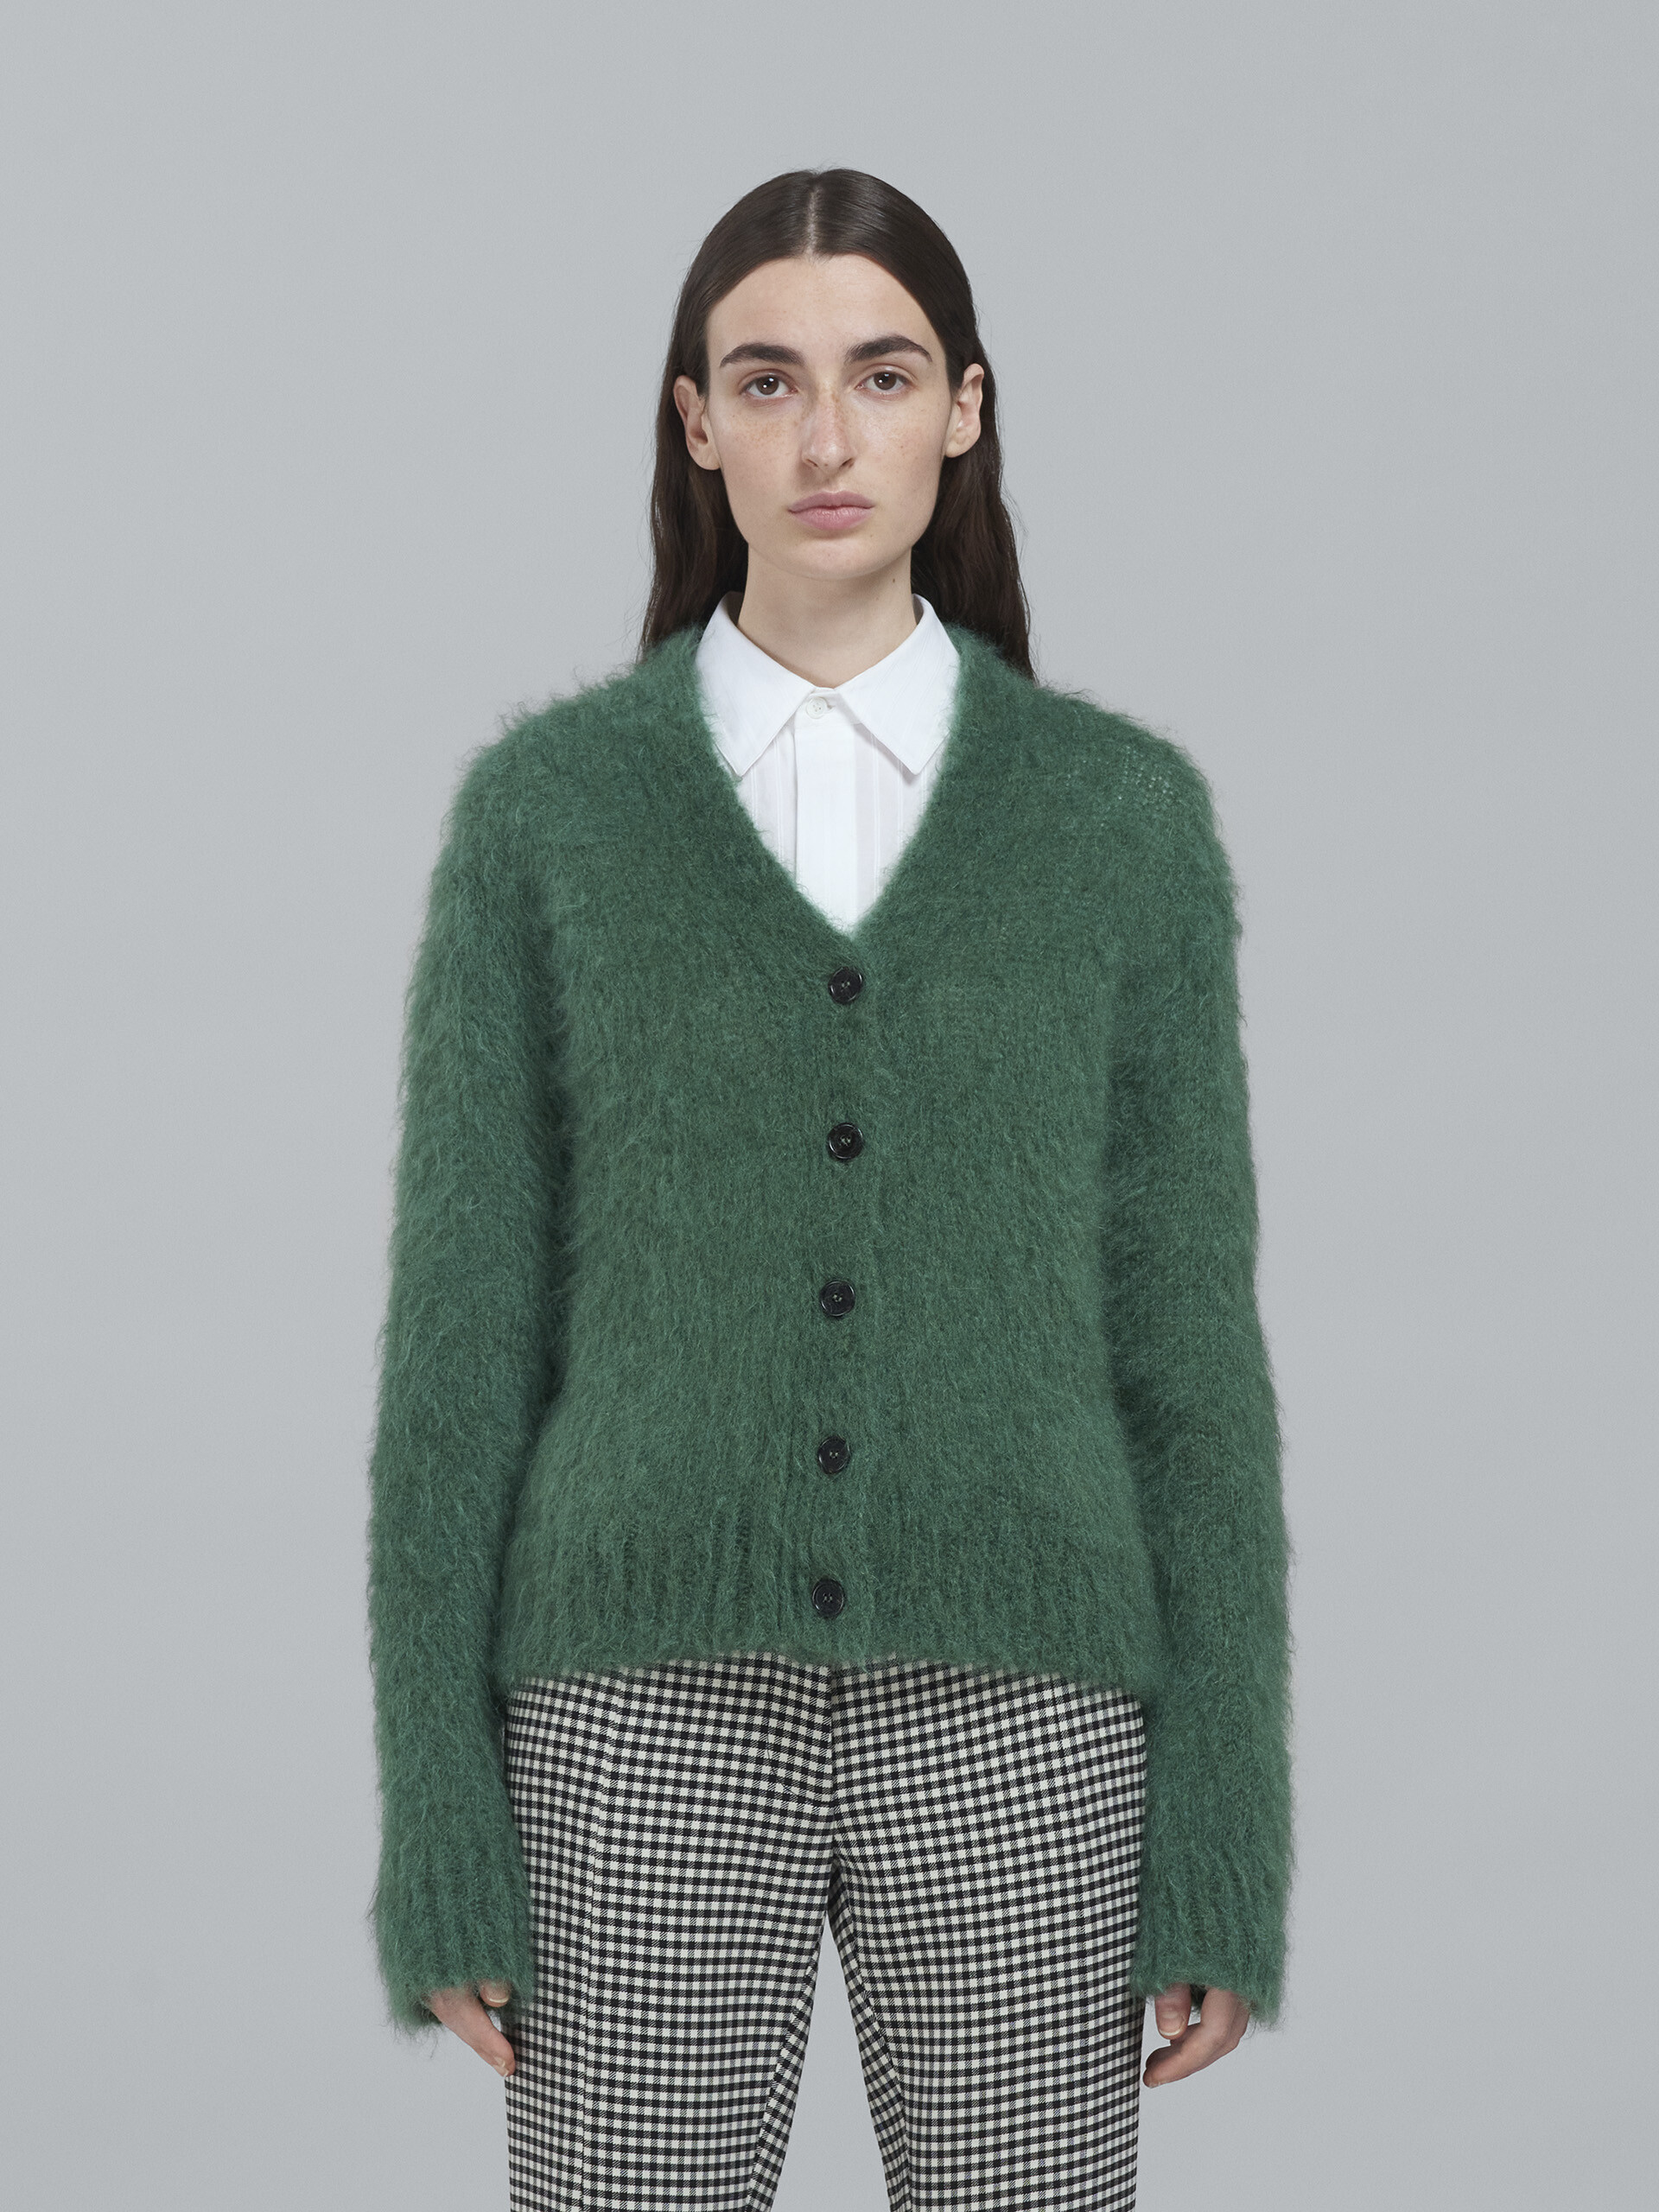 Mohair and wool long cardigan - Pullovers - Image 2